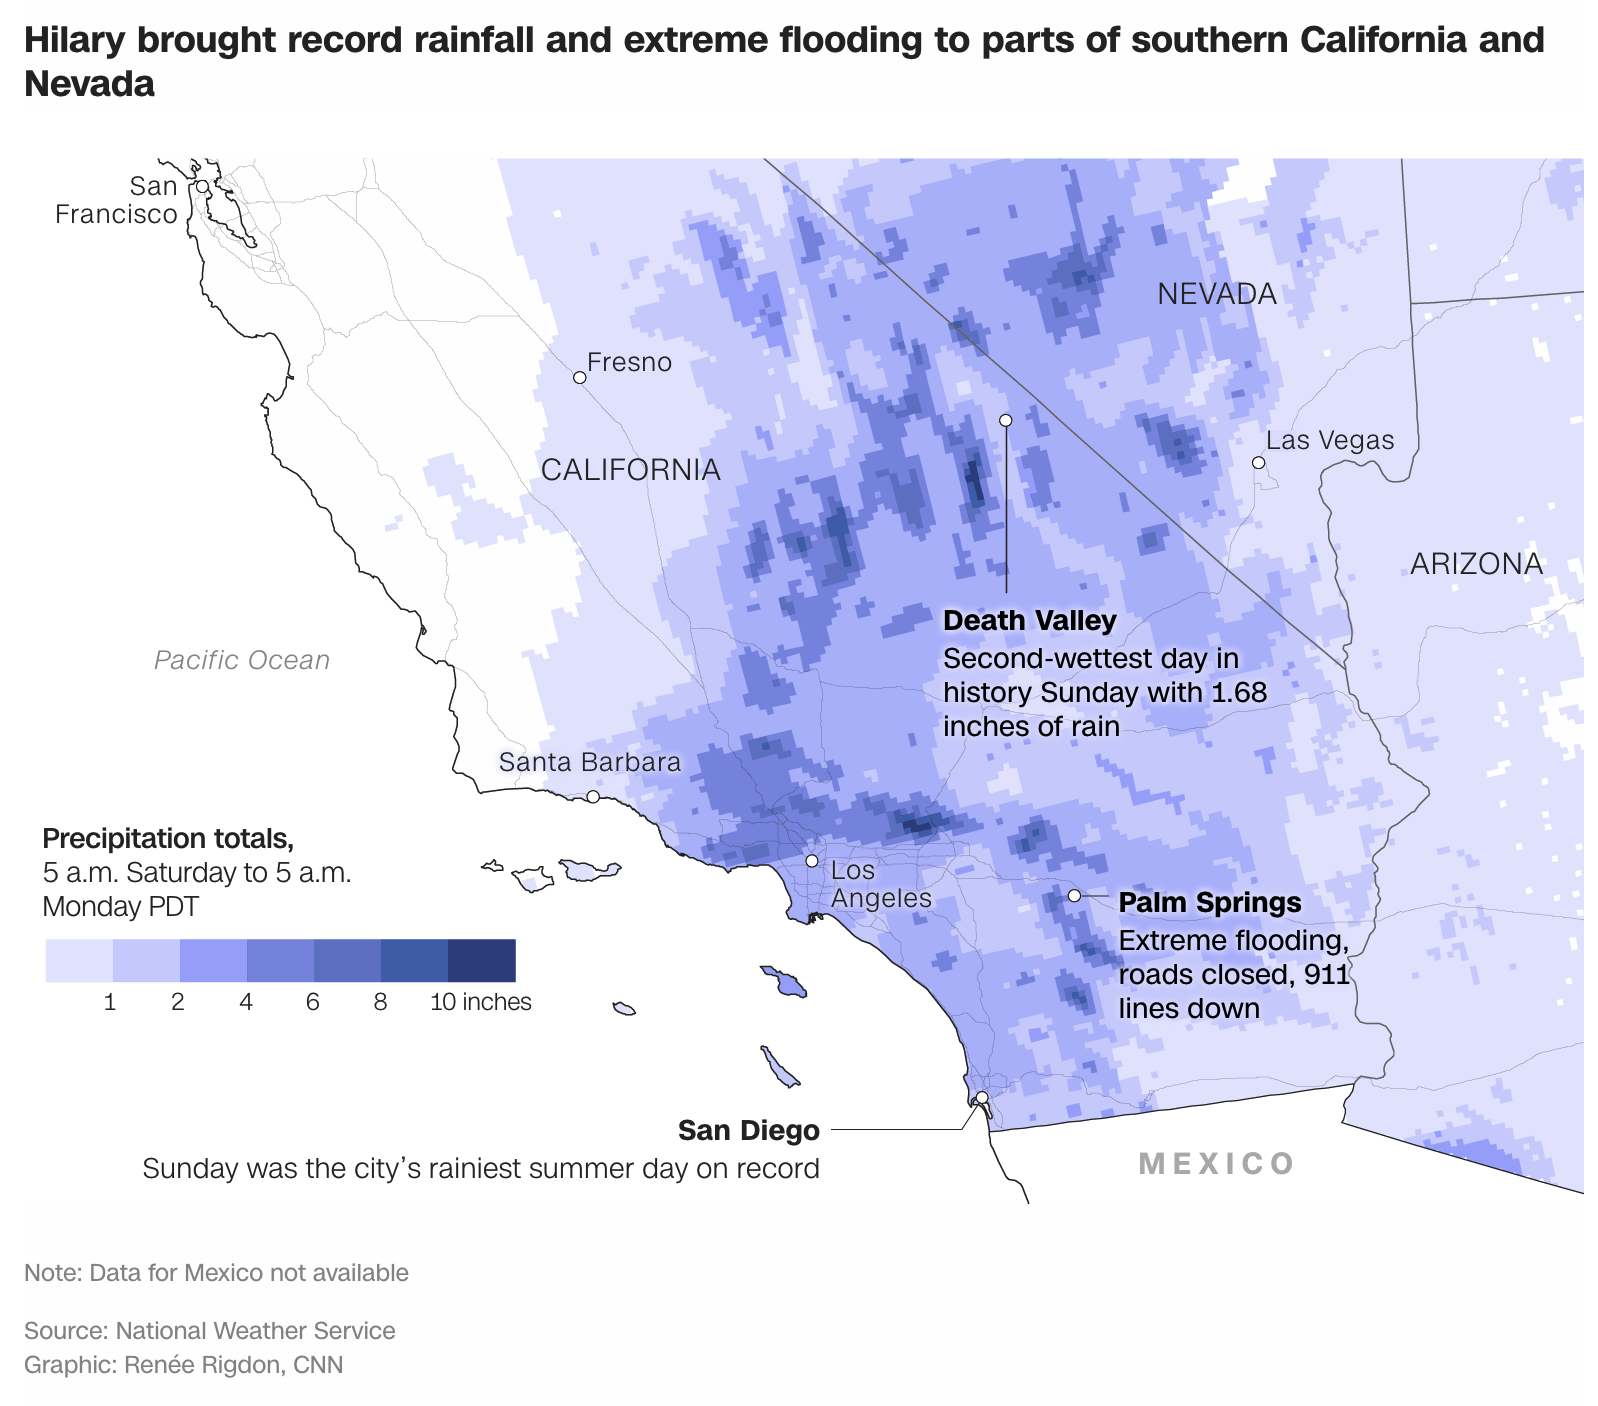 One in 5 California schools located in moderate or high flood risk areas